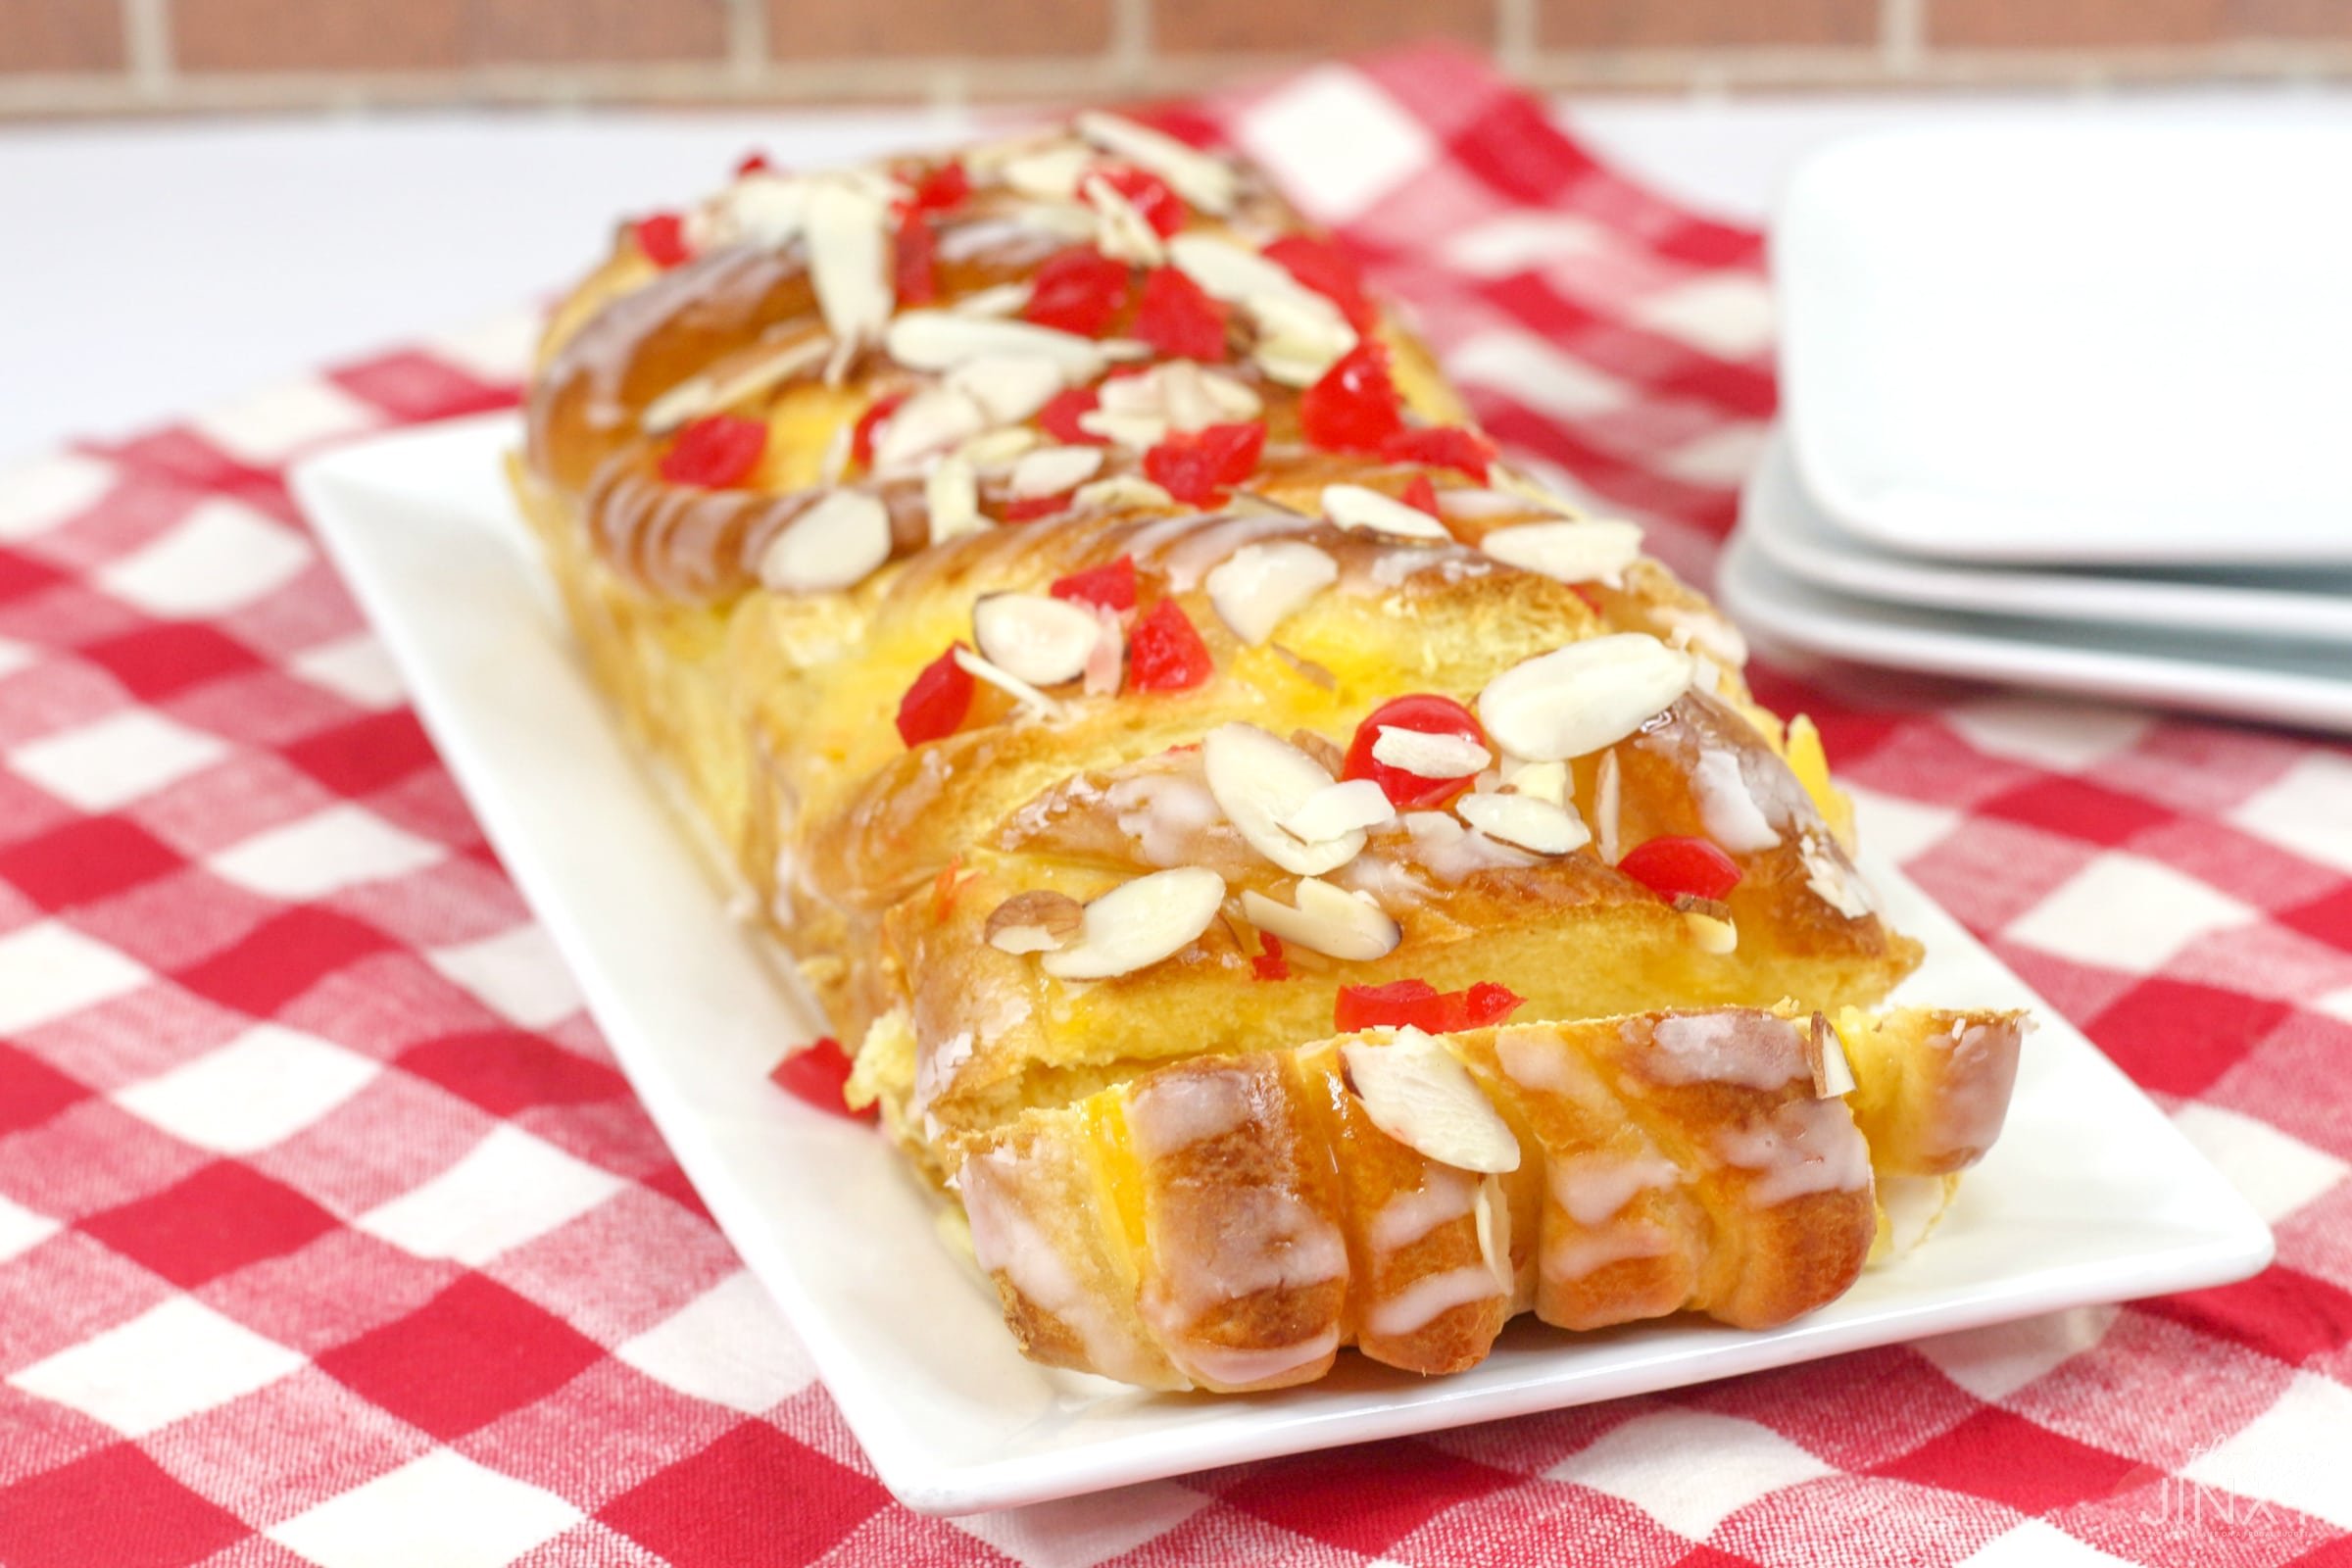 Japanese Condensed Milk Bread with Cherries and Almonds